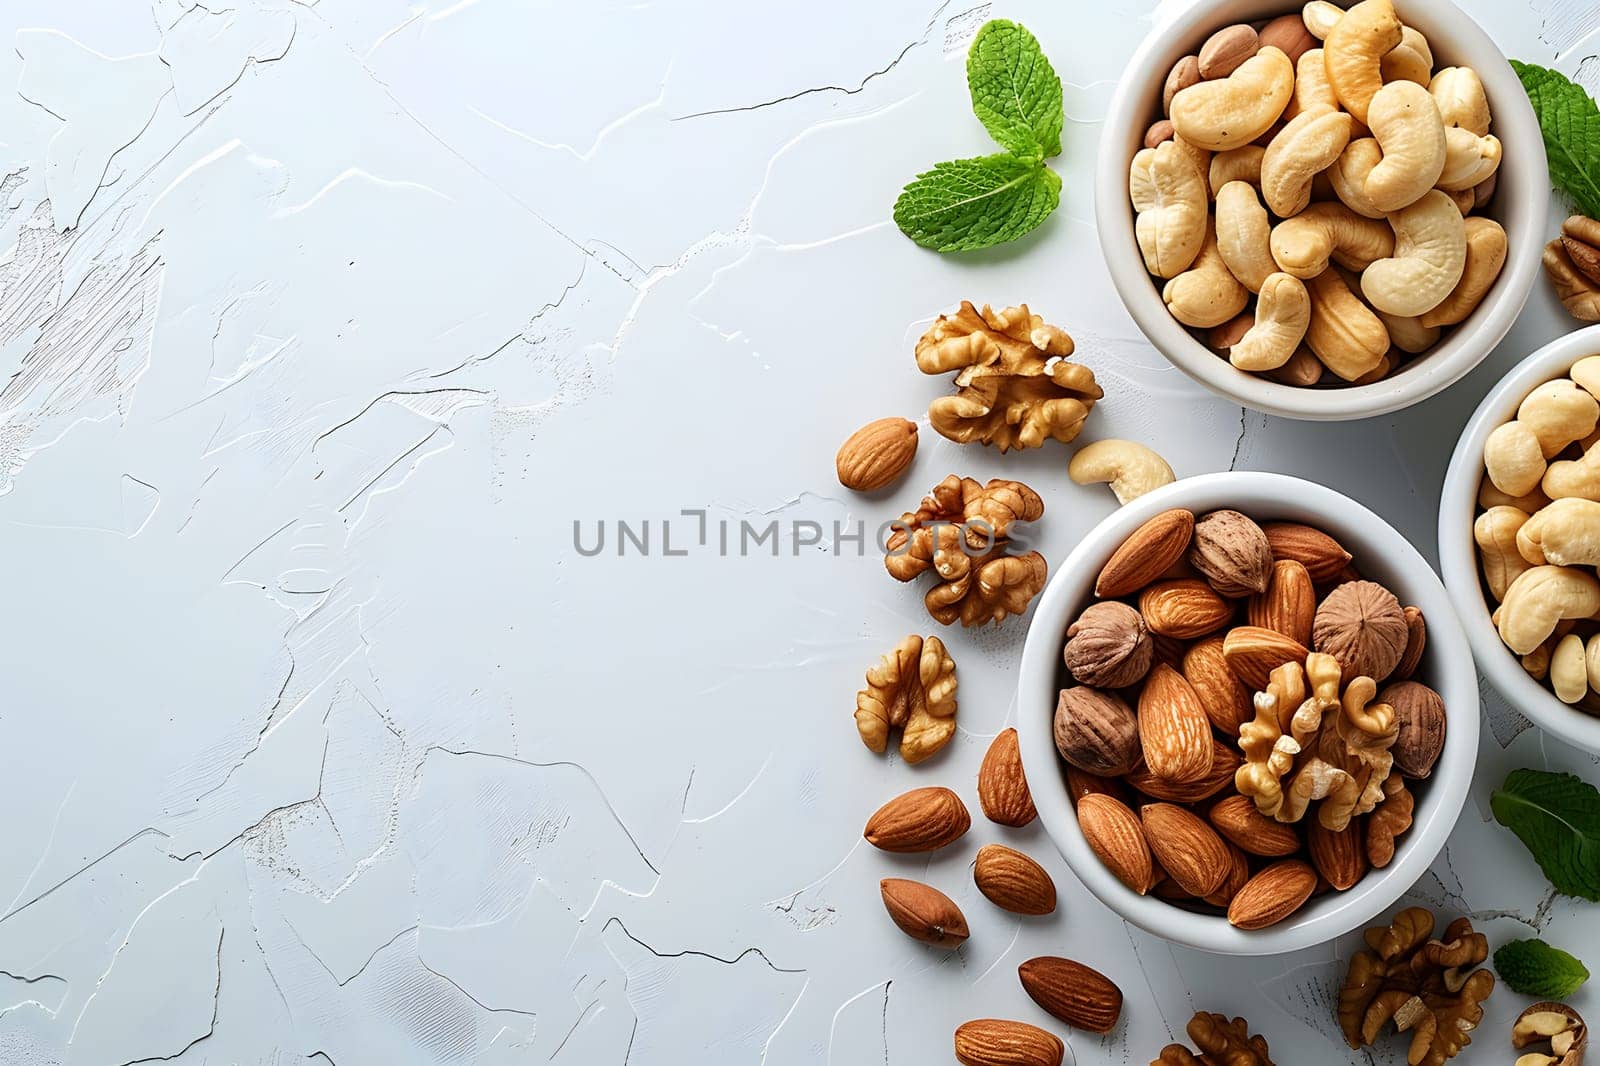 The table is filled with bowls of mixed nuts, a superfood ingredient commonly used in various cuisine recipes. Enjoy the natural, nutritious snack